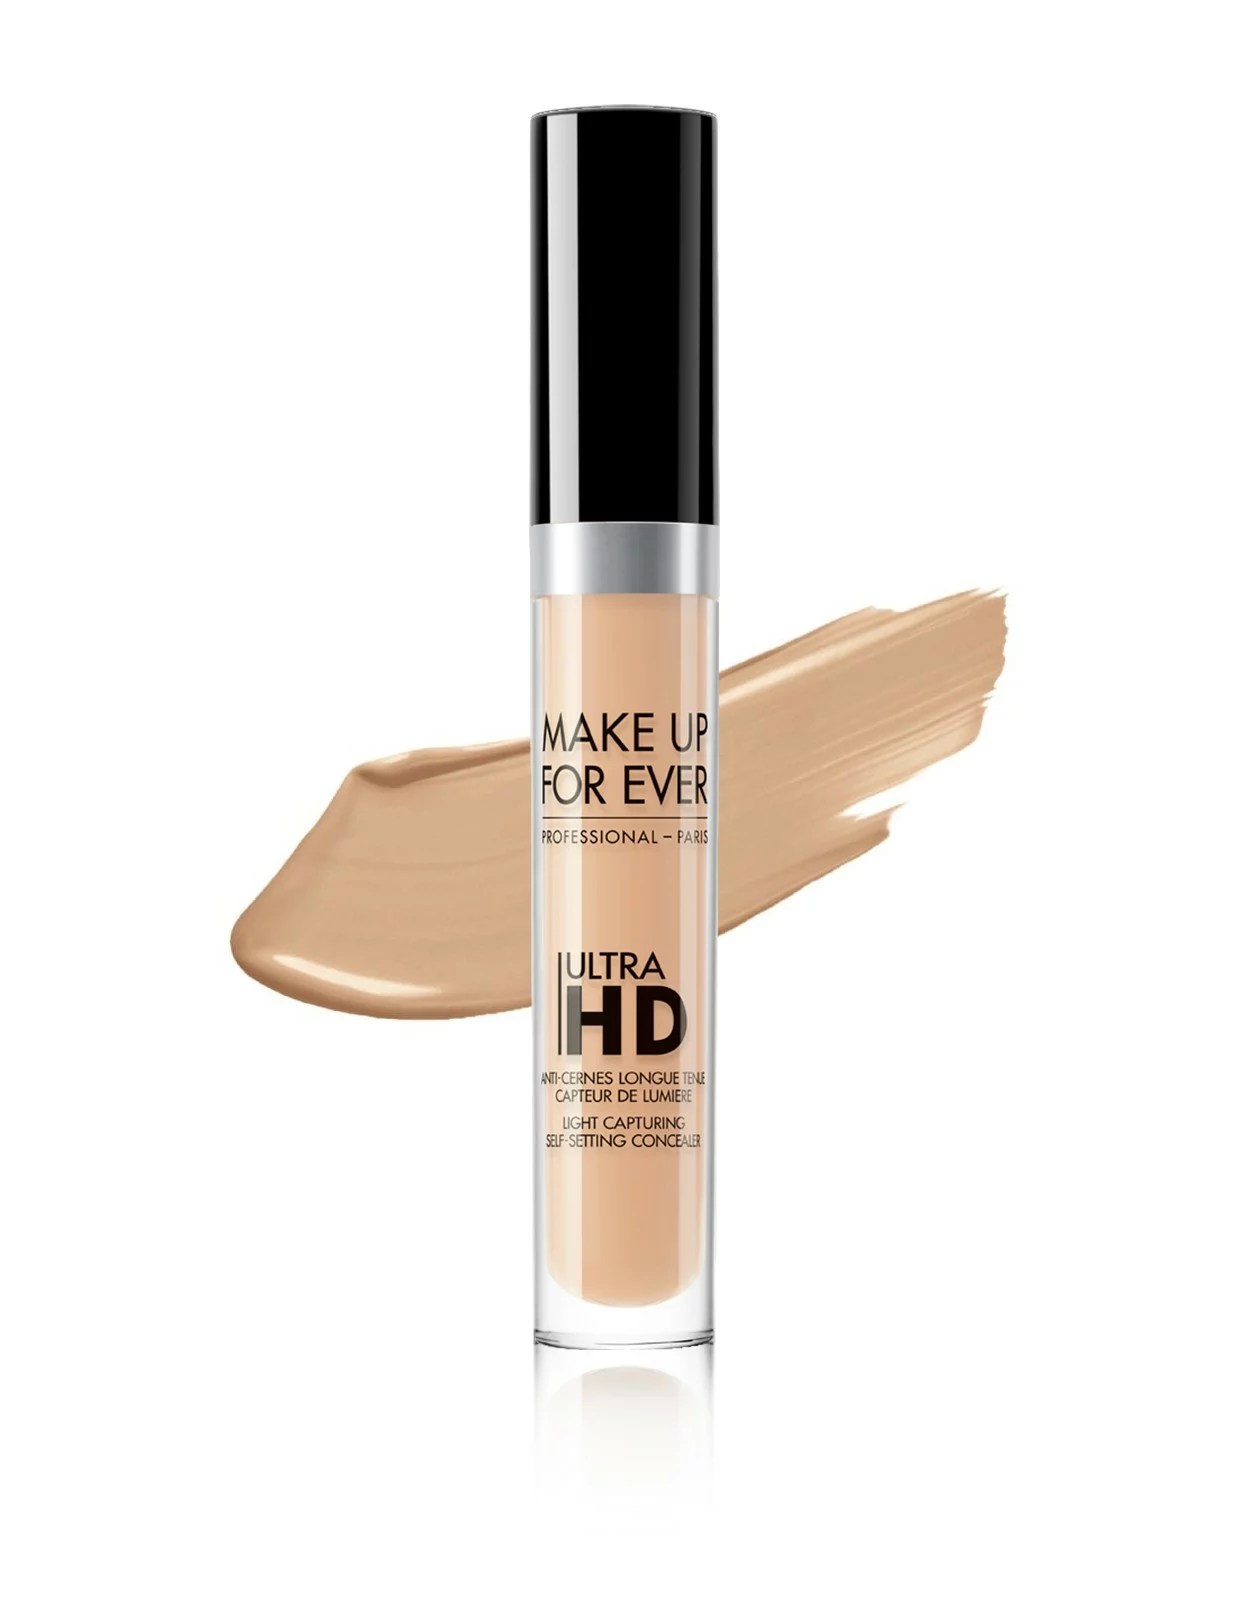 Make Up For Ever Ultra HD Invisible Cover Concealer ~ full size